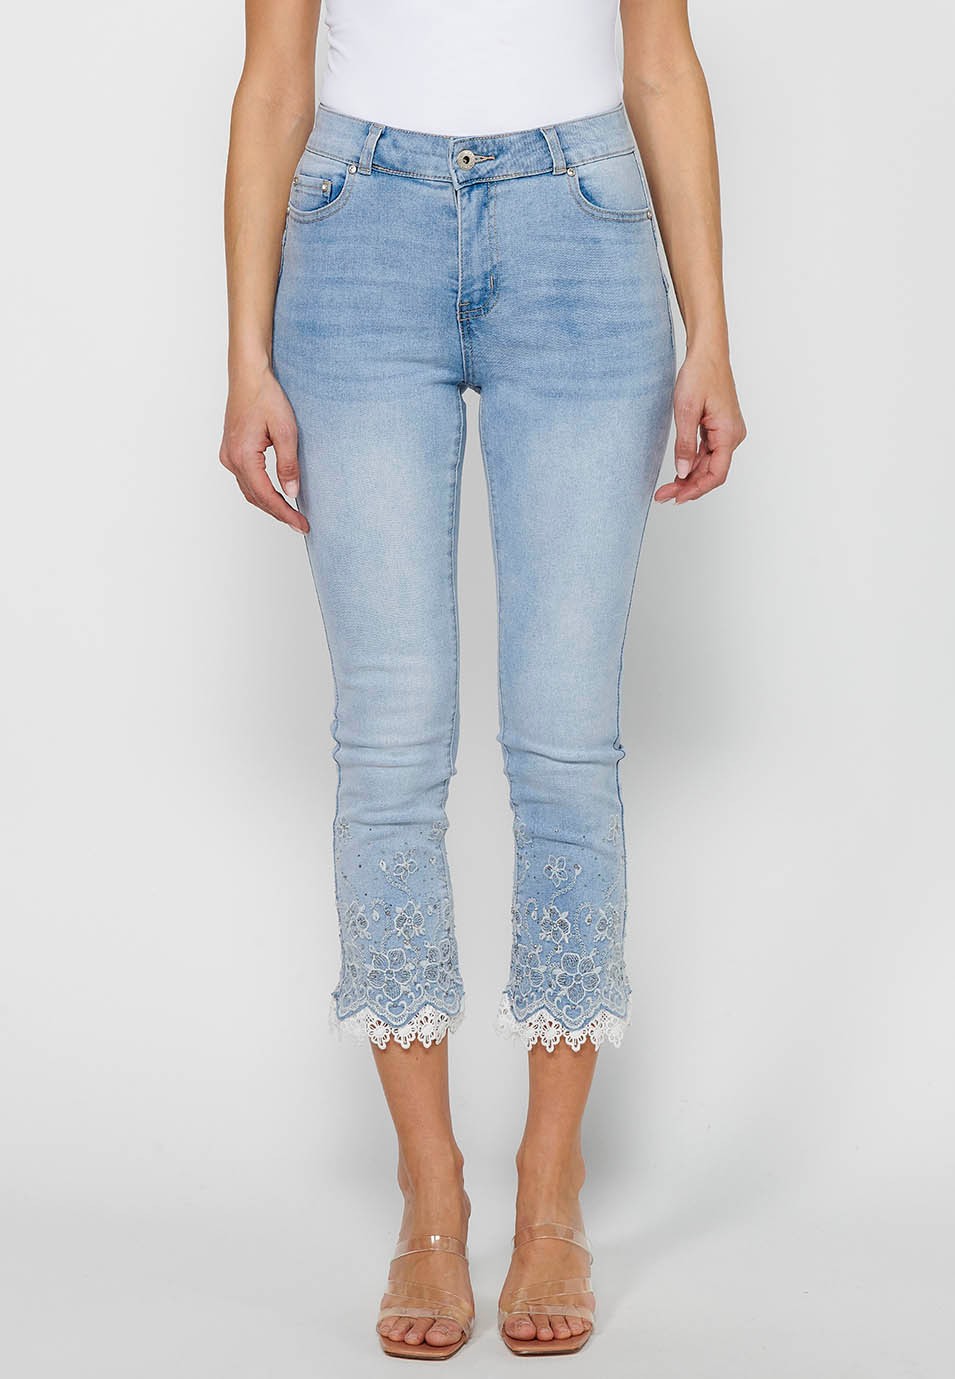 Long slim jeans pants with front zipper closure and light blue floral embroidered details for women 1